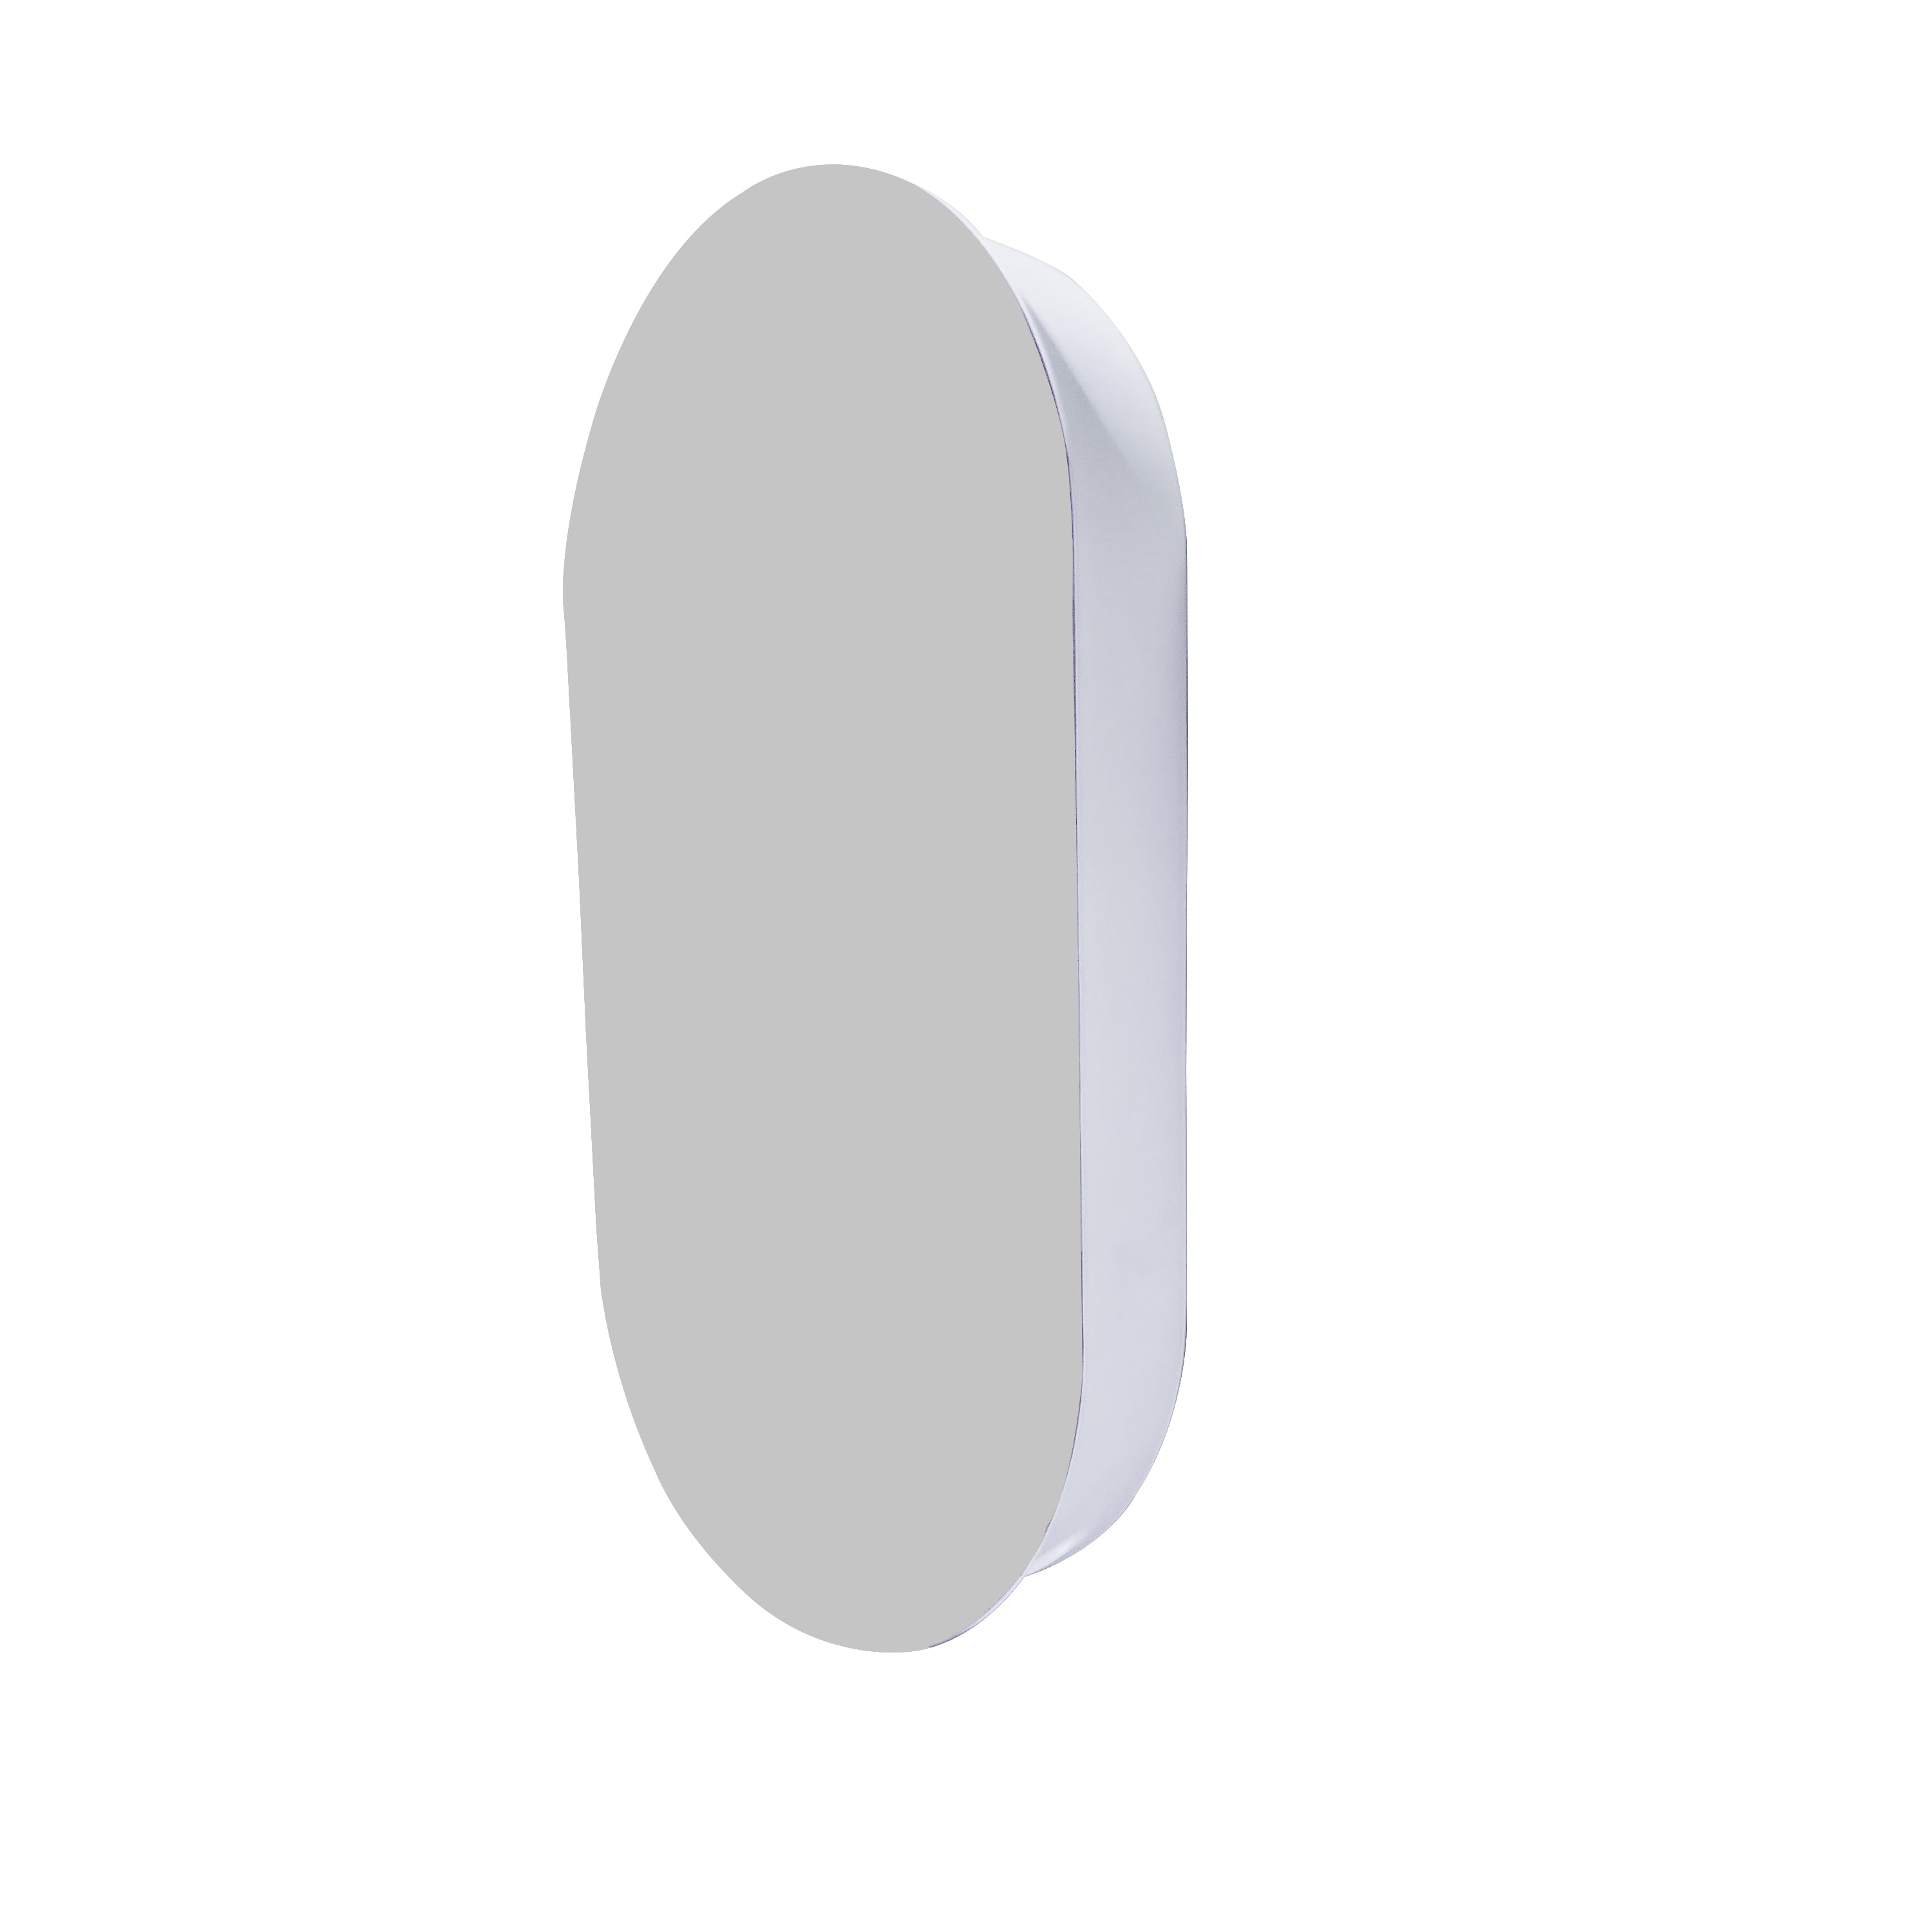 NEO OVAL ROUND MIRROR CABINET 500 X 950MM - 2 COLOURS